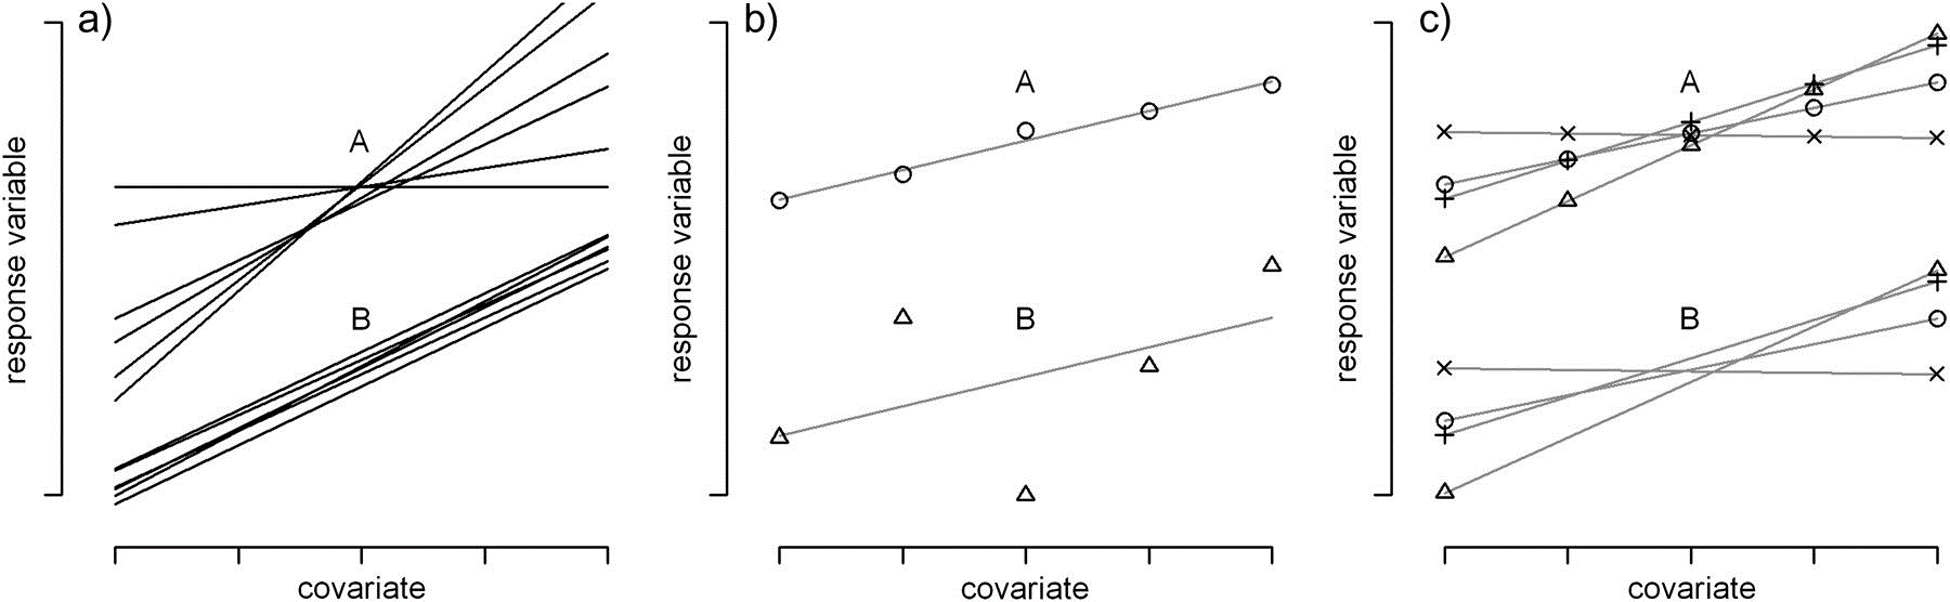 Figure from Schielzeth & Forstmeier (2009). CC By NC 2.0. Schematic illustrations of more (A) and less (B) problematic cases for the estimation of fixed-effect covariates in random-intercept models. (a) Regression lines for several individuals with high (A) and low (B) between-individual variation in slopes (\(\sigma_b\))). (b) Two individual regression slopes with low (A) and high (B) scatter around the regression line (\(\sigma_r\)). (c) Regression lines with (A) many and (B) few measurements per individual (independent of the number of levels of the covariate).